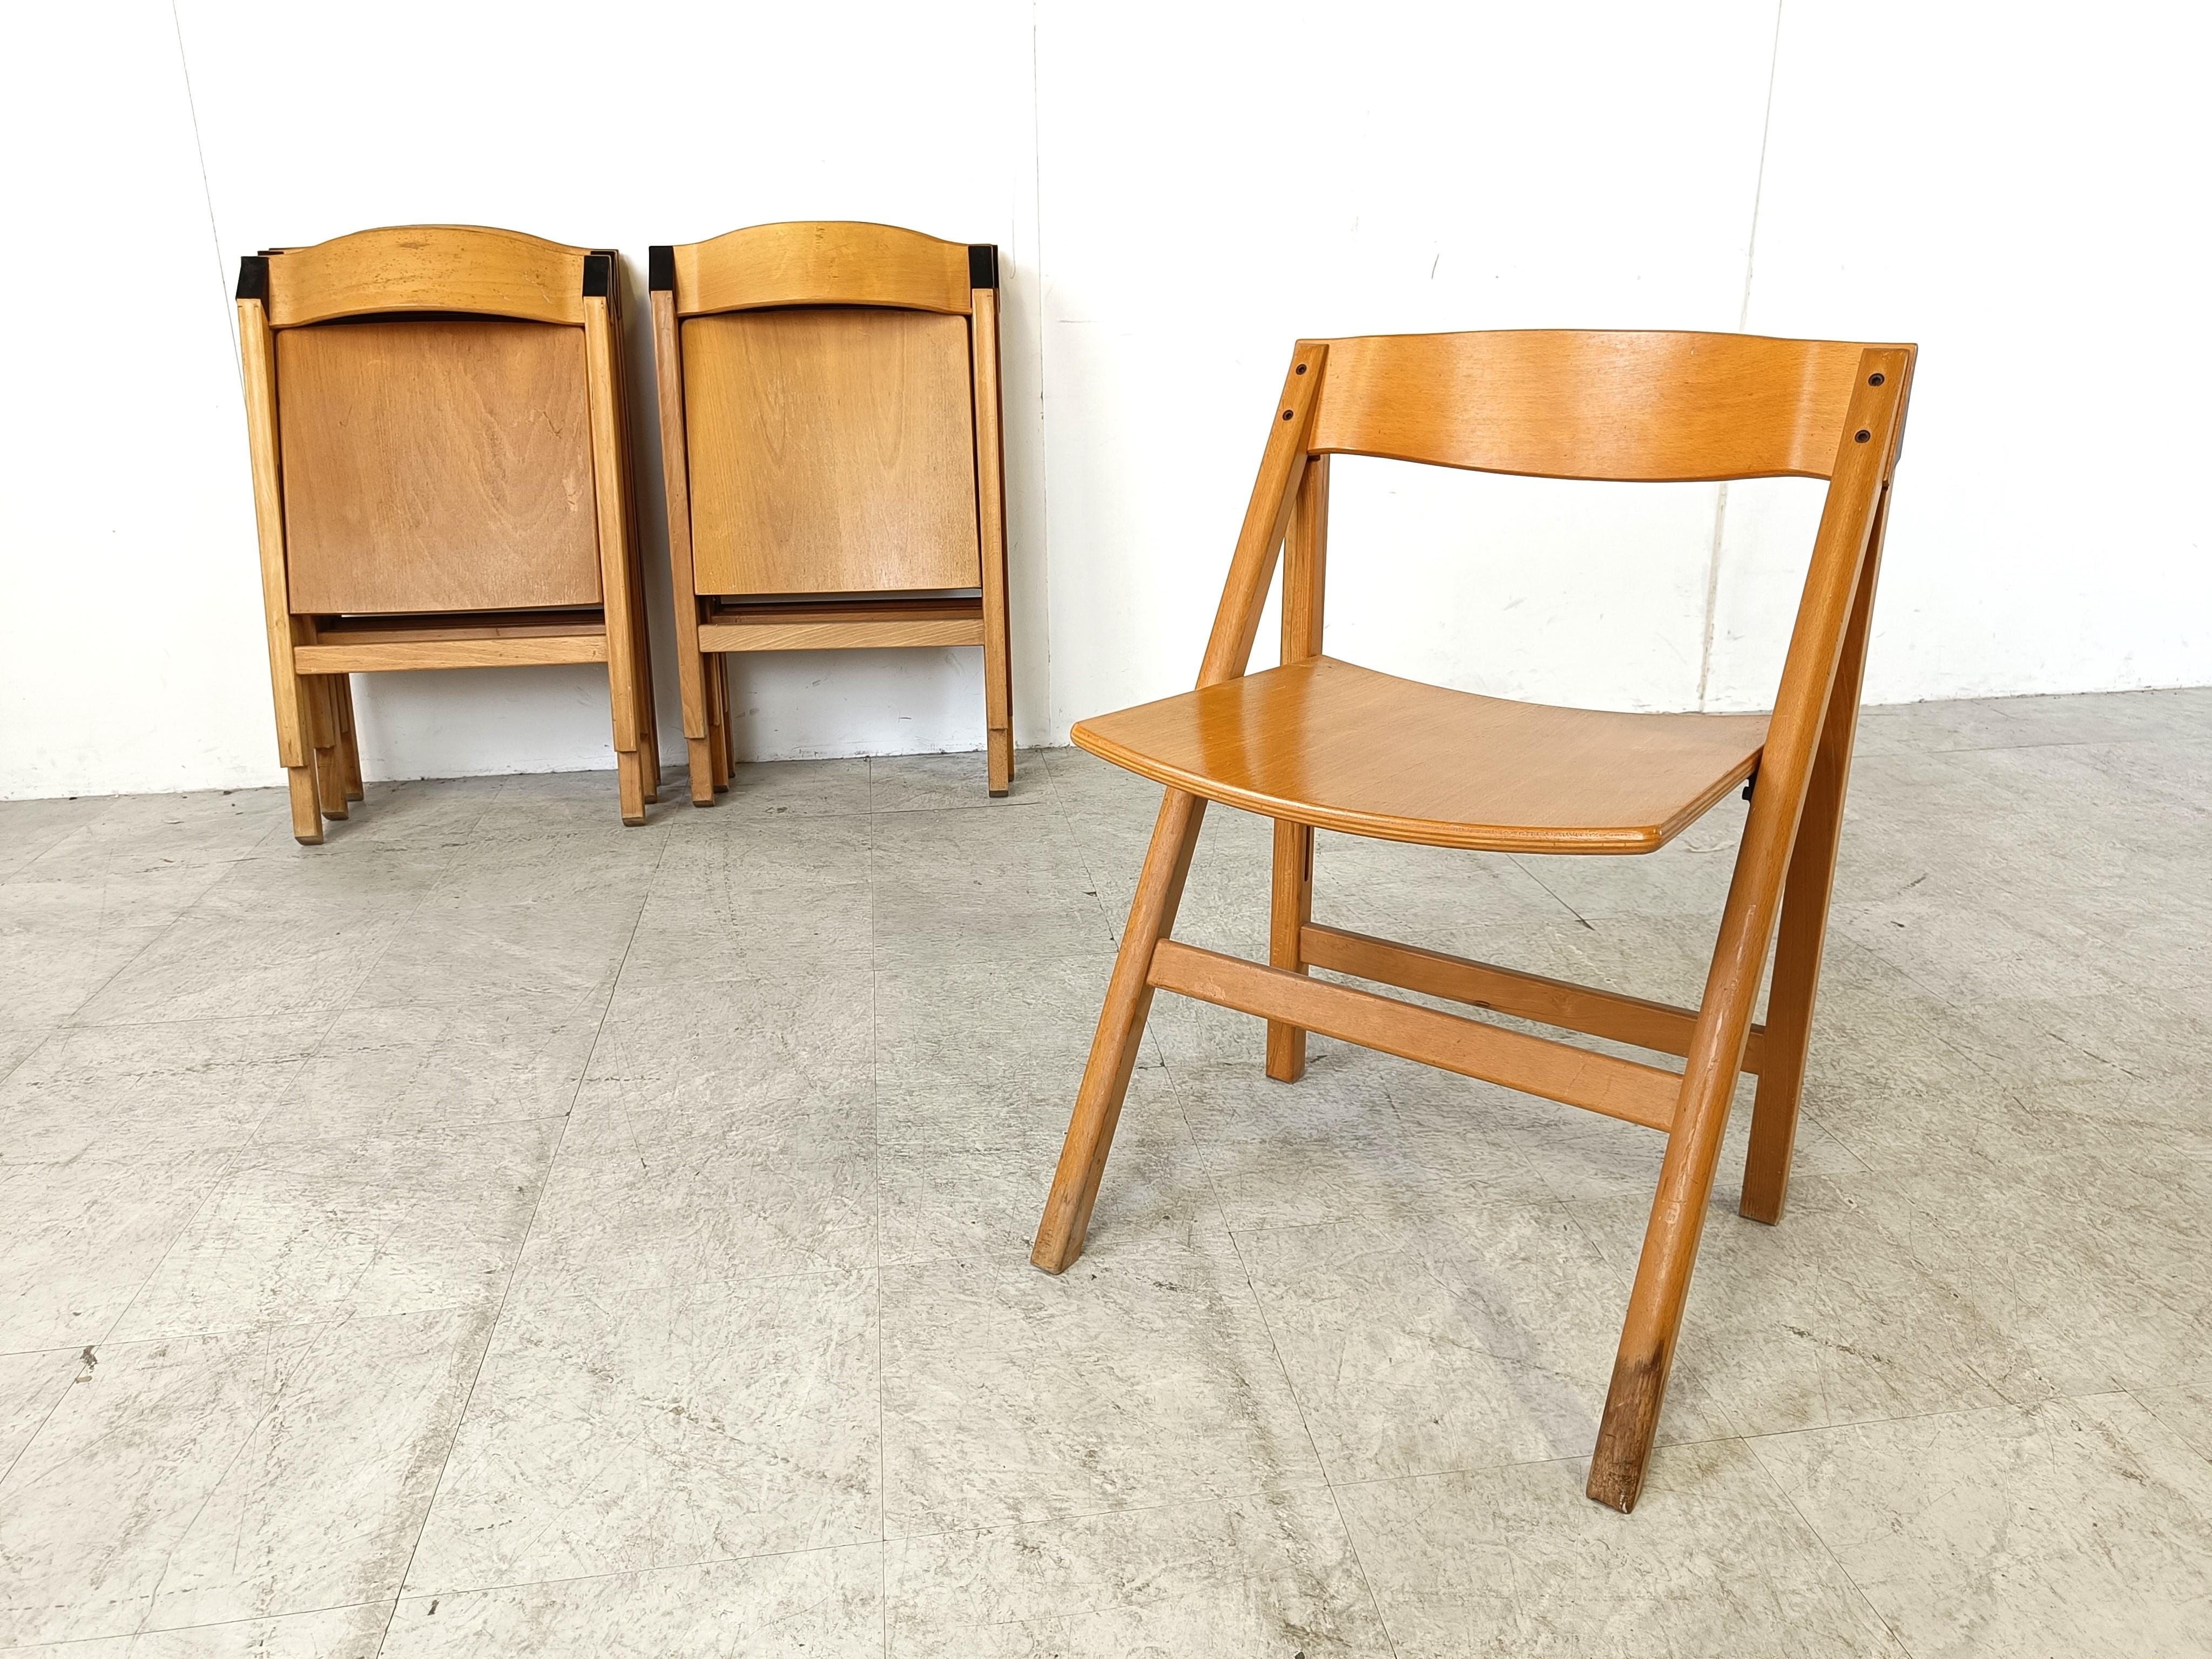 Vintage scandinavian folding chairs by Hyllinge Mobler, 1970s - set of 8 For Sale 1